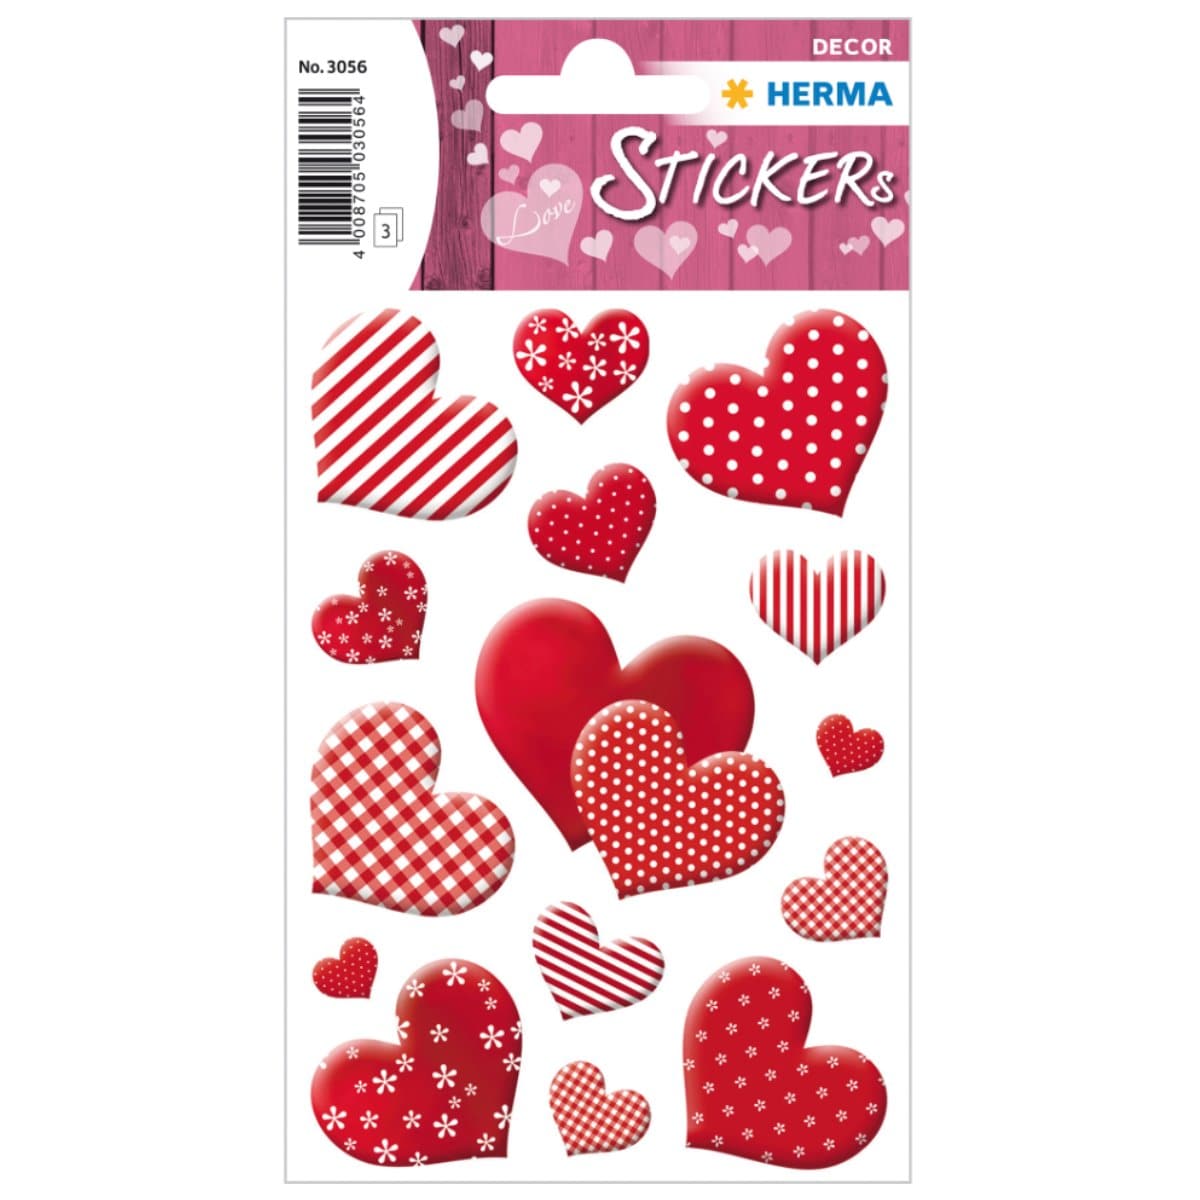 Herma Decor Stickers Patterned HEARTS, 3 sheets/pack, Red